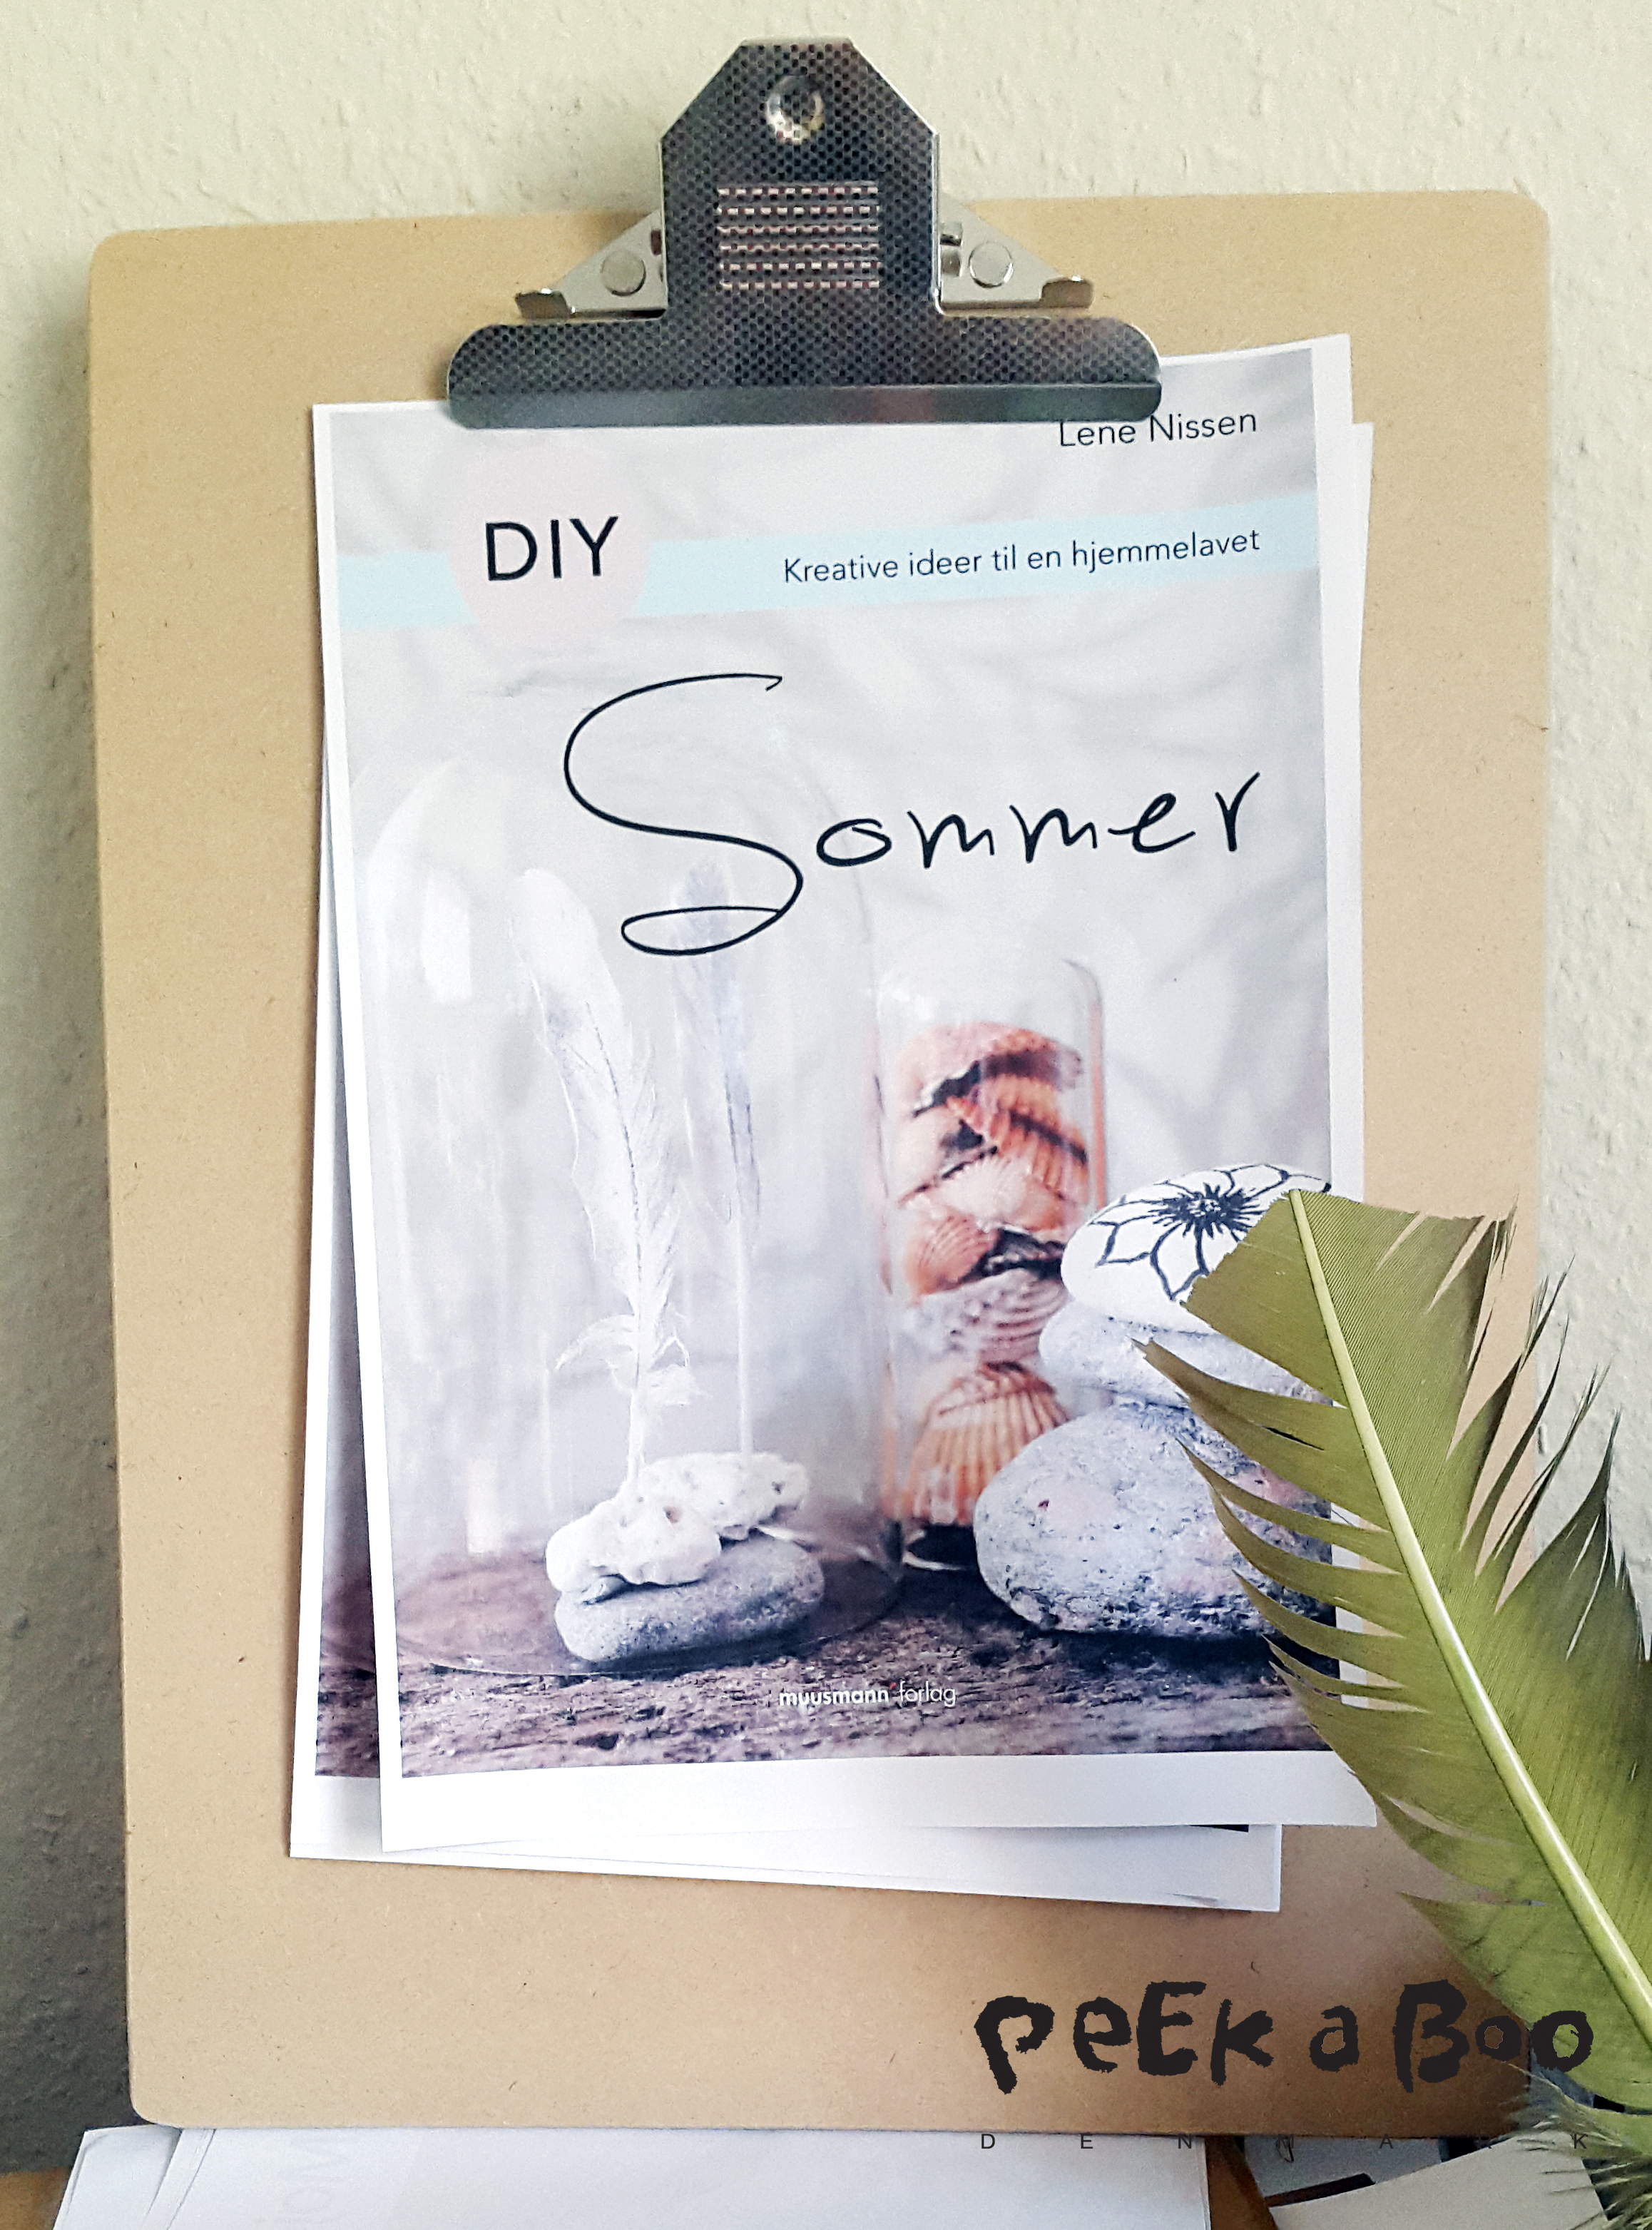 Front cover for my new book on summer DIY's. It will be released 19 of June and can be bought on saxo.com